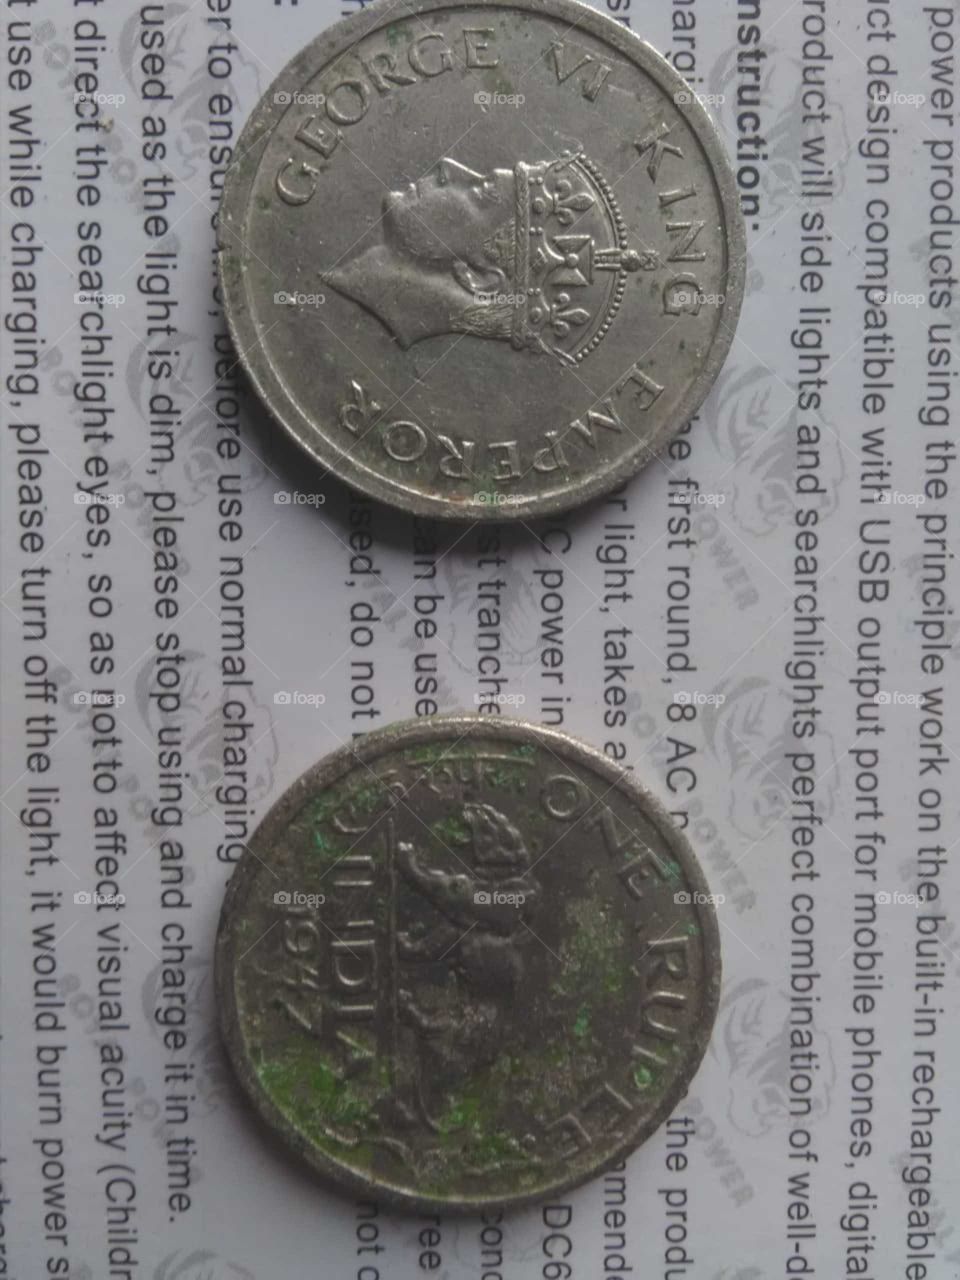 This coin was George vi king 1947mad in India silver coins.